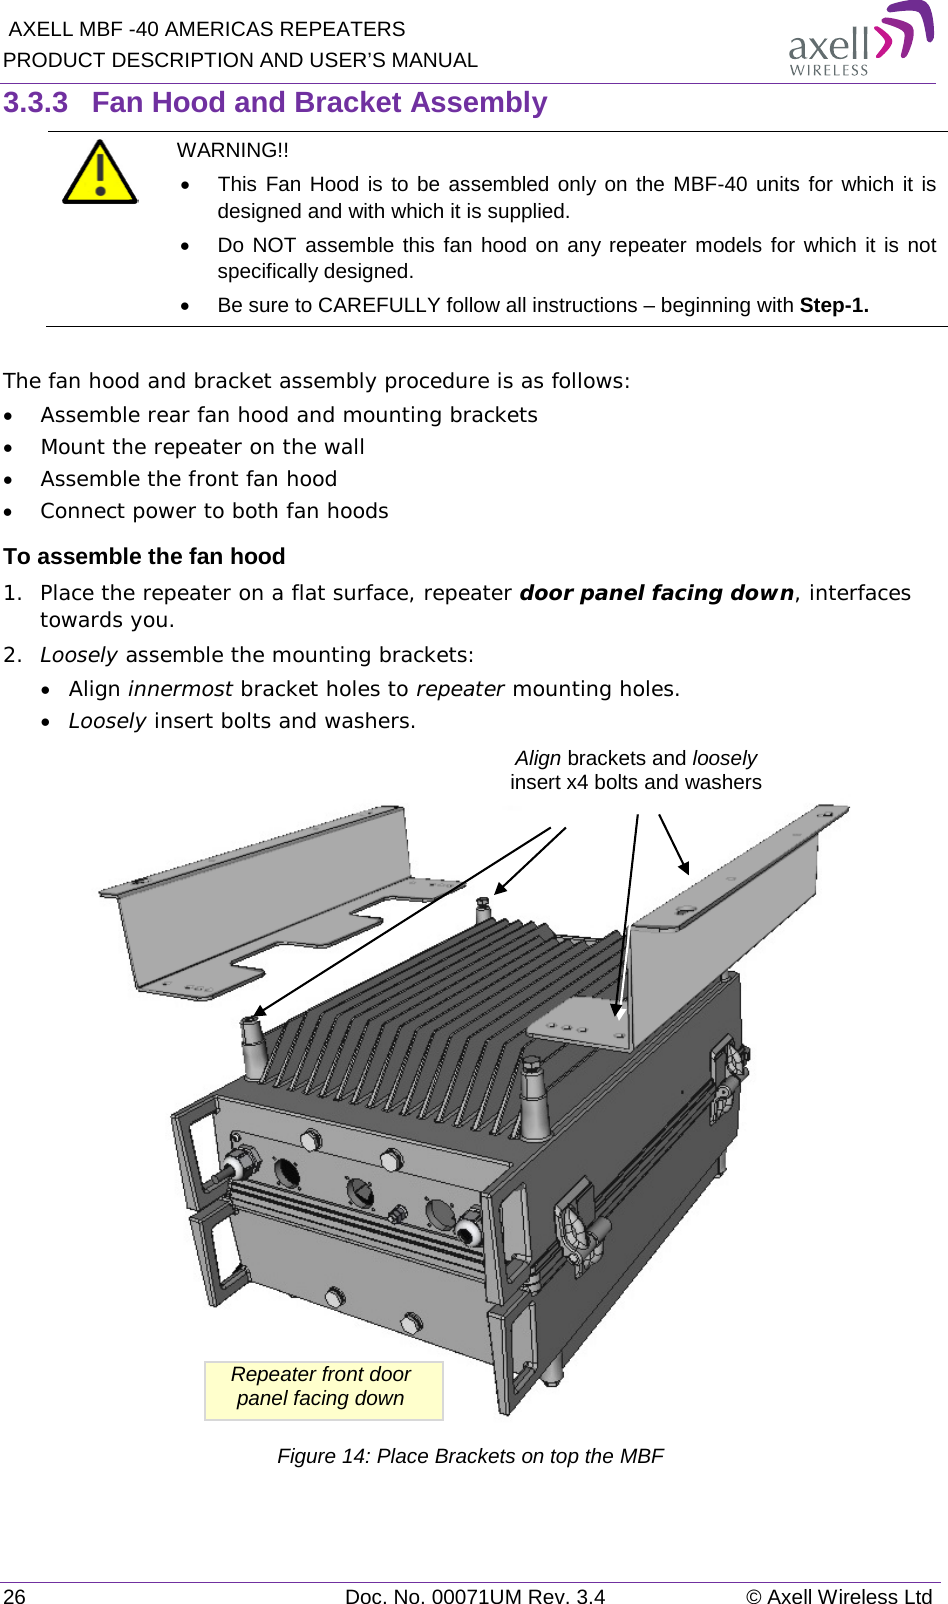  AXELL MBF -40 AMERICAS REPEATERS PRODUCT DESCRIPTION AND USER’S MANUAL 26 Doc. No. 00071UM Rev. 3.4 © Axell Wireless Ltd 3.3.3  Fan Hood and Bracket Assembly  WARNING!!  • This Fan Hood is to be assembled only on the MBF-40 units for which it is designed and with which it is supplied. • Do NOT assemble this fan hood on any repeater models for which it is not specifically designed. • Be sure to CAREFULLY follow all instructions – beginning with Step-1.  The fan hood and bracket assembly procedure is as follows: • Assemble rear fan hood and mounting brackets • Mount the repeater on the wall • Assemble the front fan hood • Connect power to both fan hoods  To assemble the fan hood 1.  Place the repeater on a flat surface, repeater door panel facing down, interfaces towards you.  2.  Loosely assemble the mounting brackets: • Align innermost bracket holes to repeater mounting holes. • Loosely insert bolts and washers.   Figure 14: Place Brackets on top the MBF    Repeater front door panel facing down Align brackets and loosely insert x4 bolts and washers 